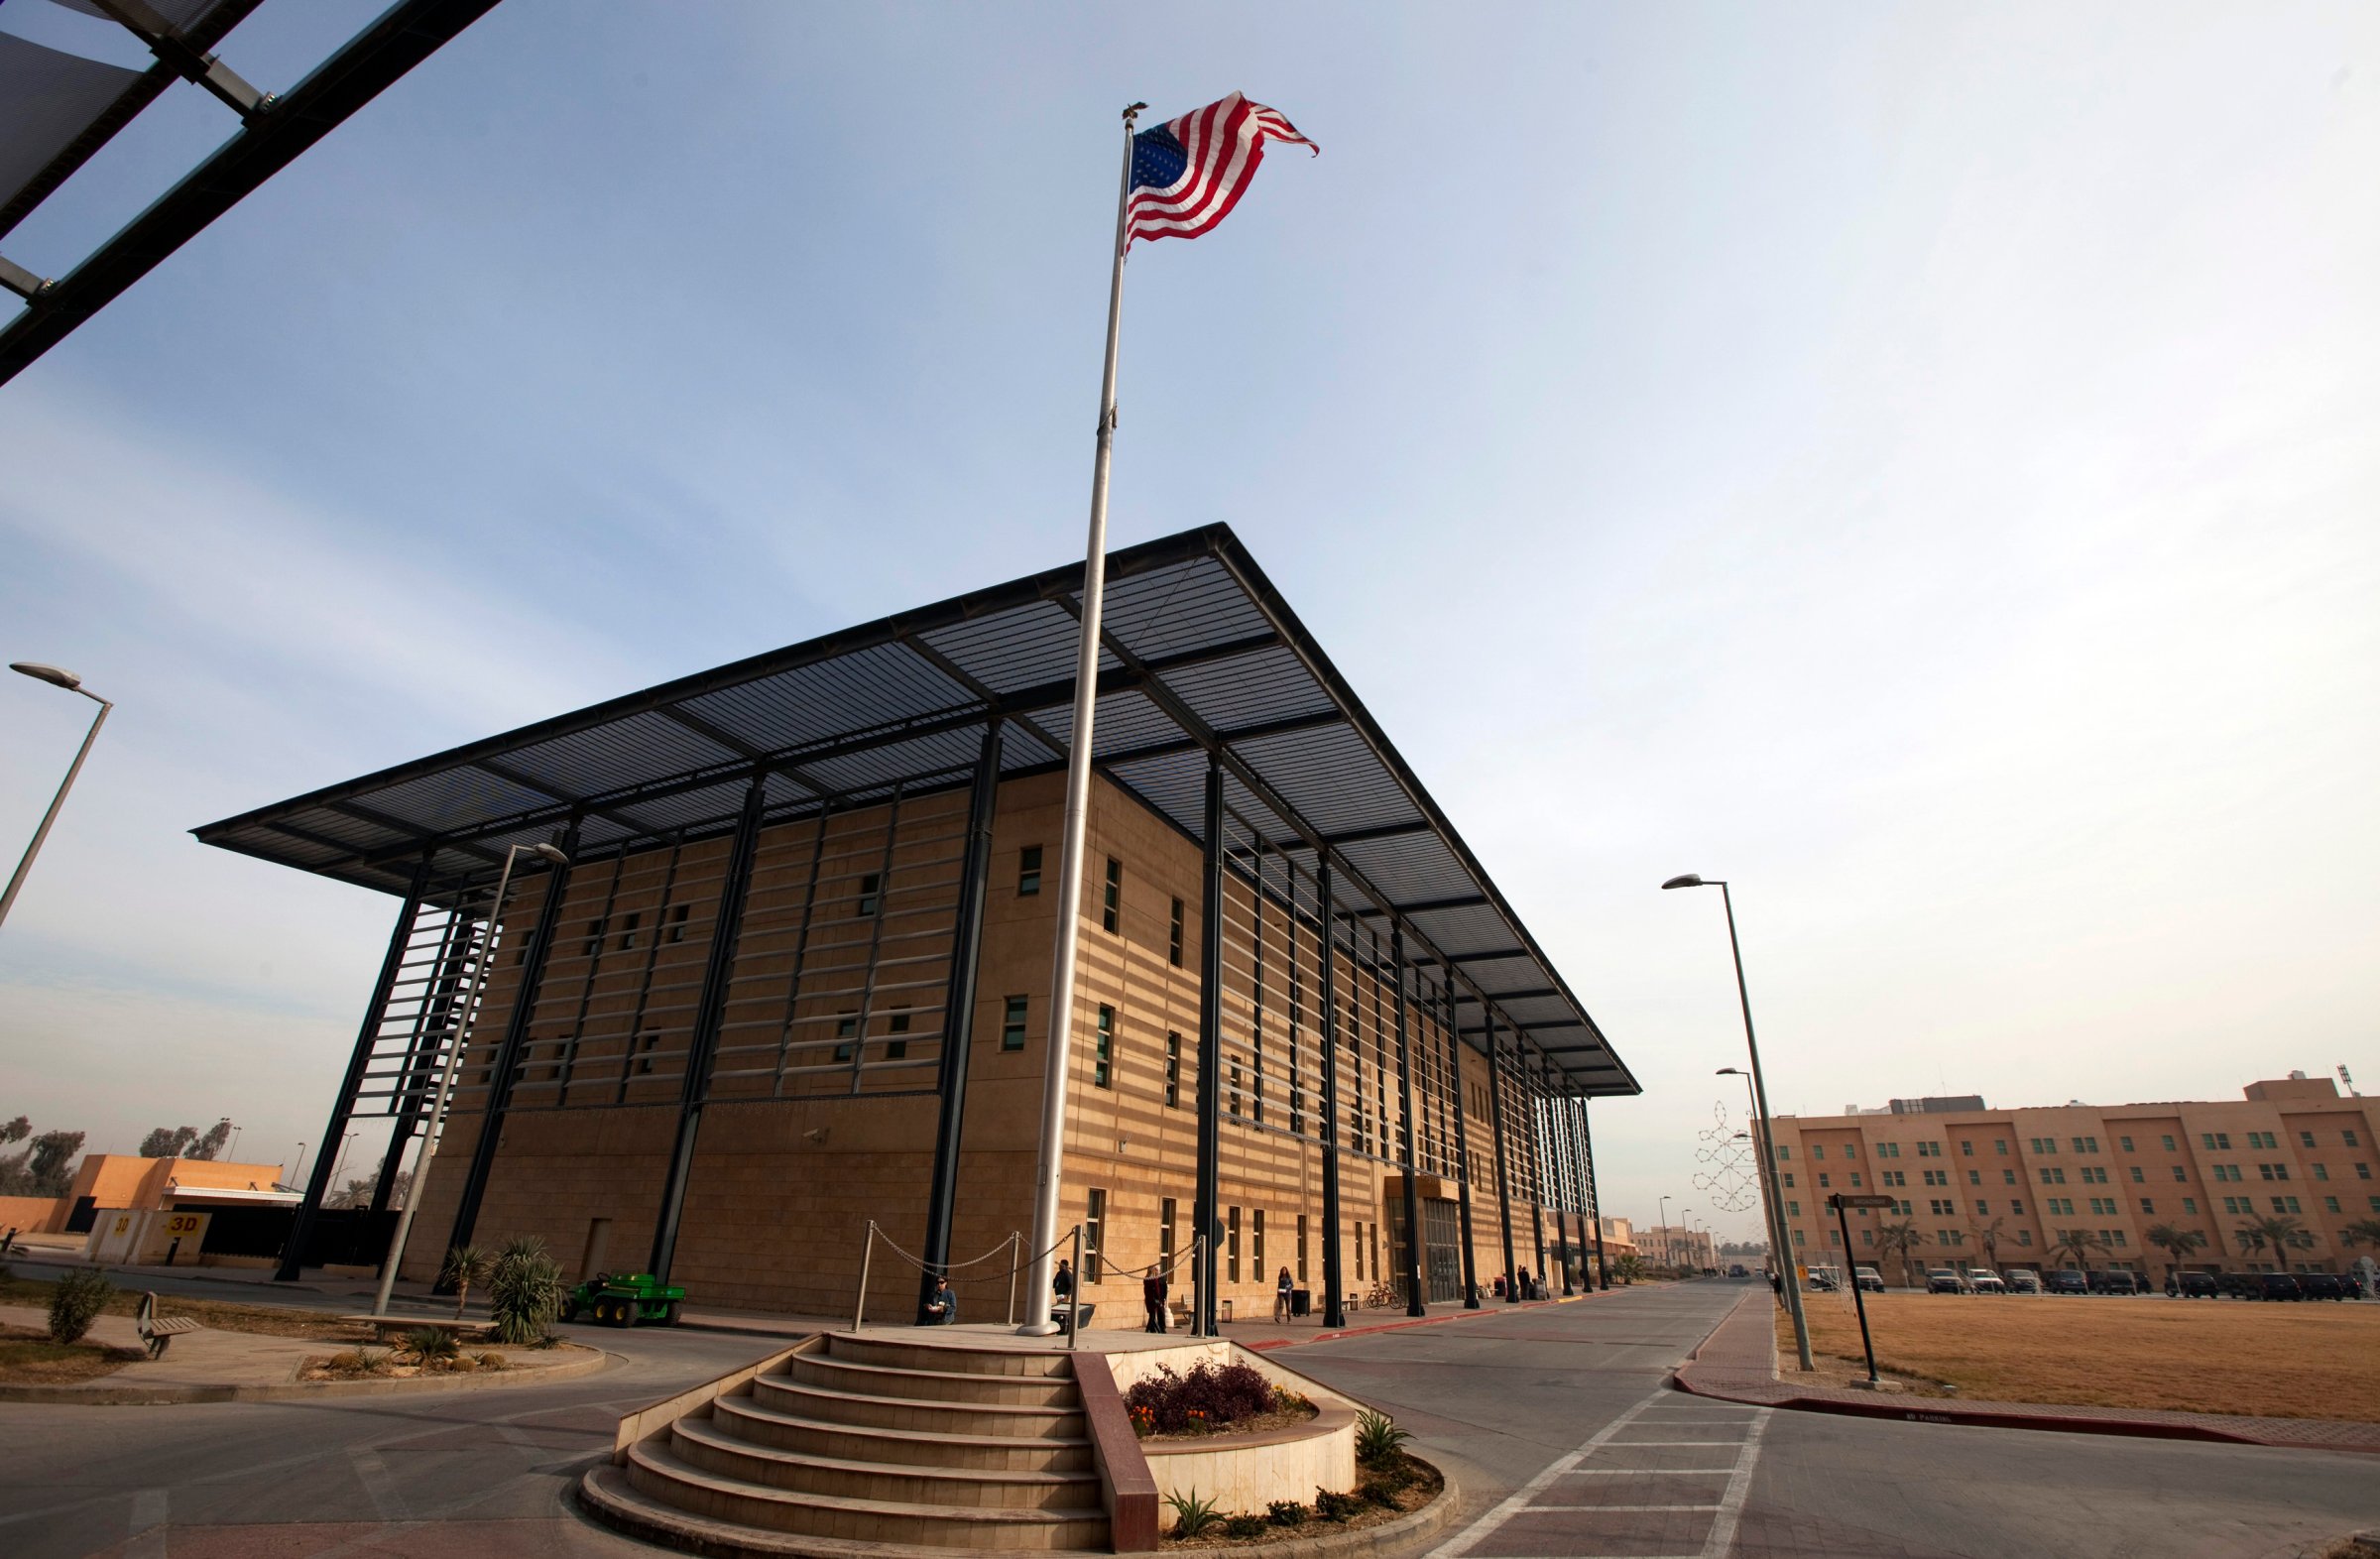 A U.S. flag flies in front of the Annex I building inside the compound of the U.S. embassy in Baghdad